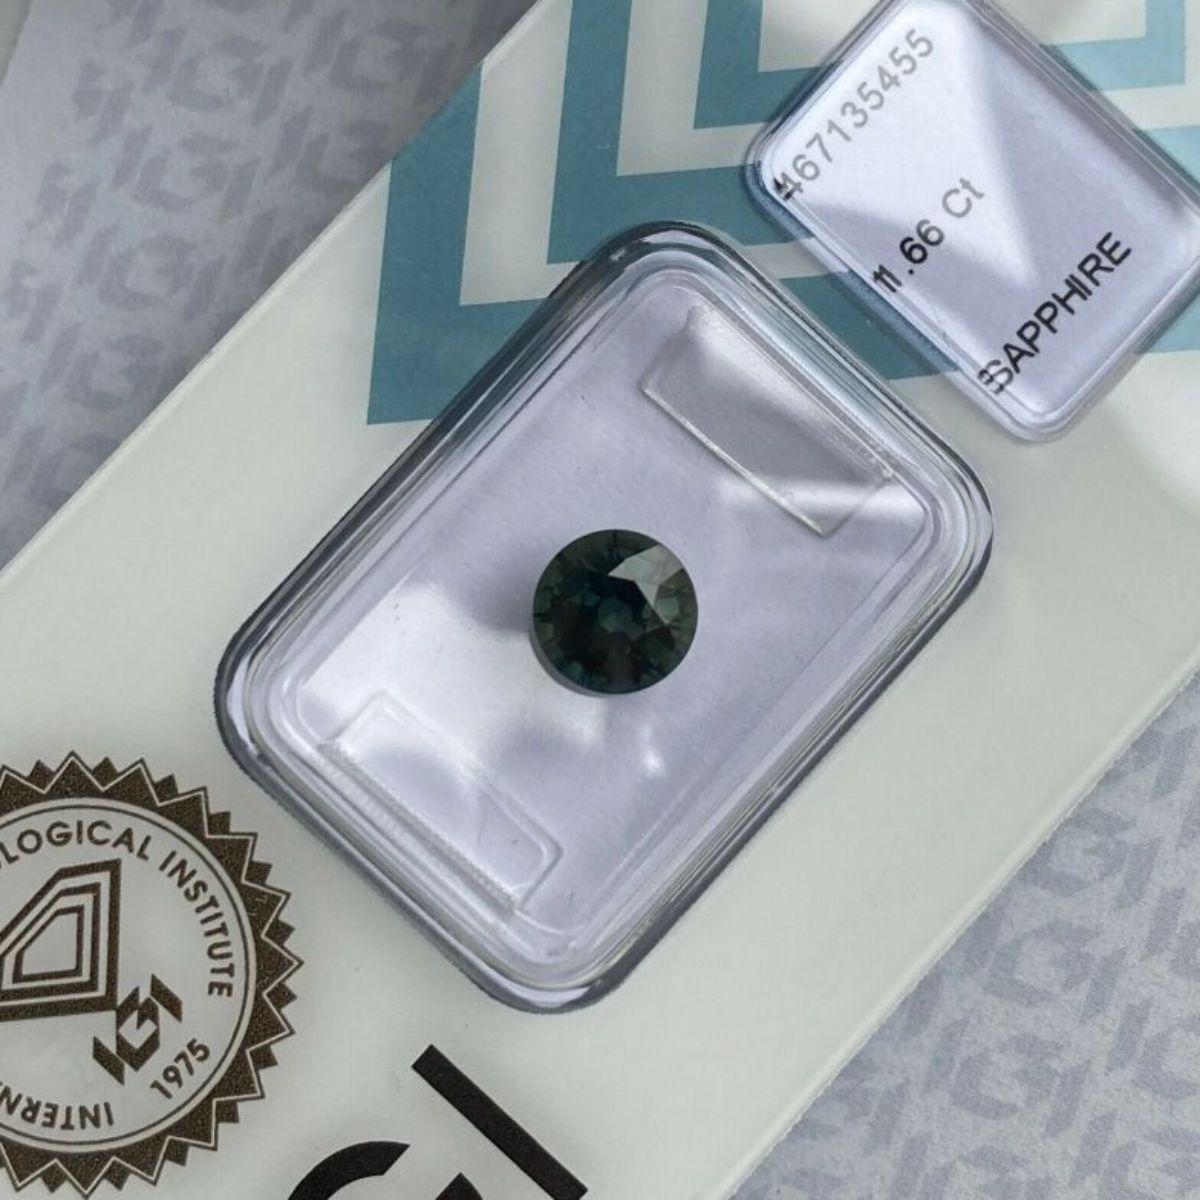 1.66ct Fine Australian Deep Green Blue Teal Sapphire Round Diamond Cut Certified

Fine Deep Green Blue ‘Teal’ Sapphire In IGI Blister. 
1.66 Carat with an excellent round cut and excellent clarity, very clean stone. 
Fully certified and sealed by